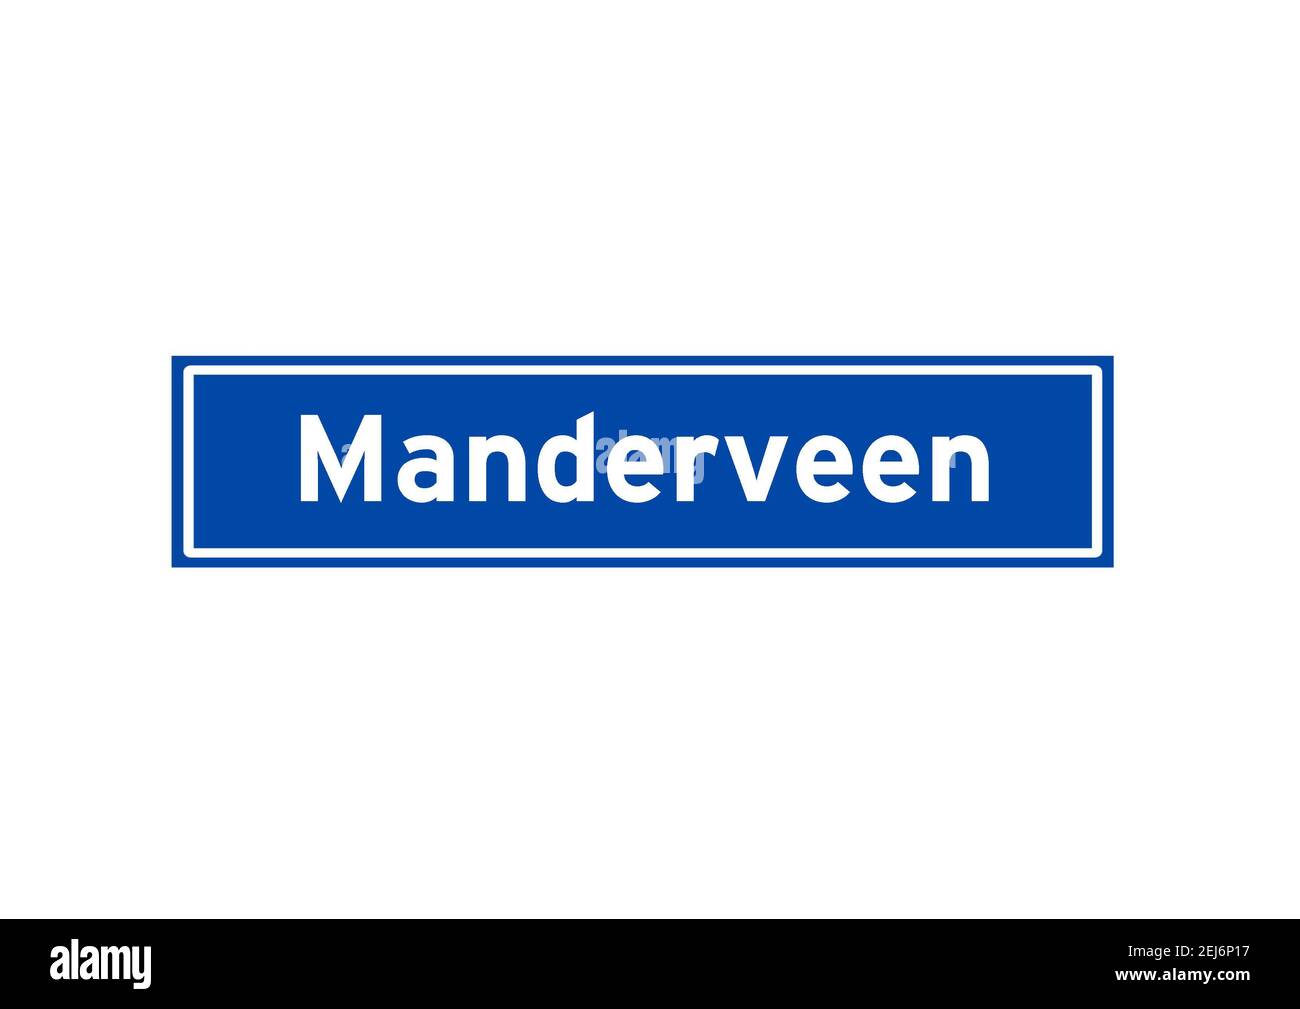 Manderveen isolated Dutch place name sign. City sign from the Netherlands. Stock Photo